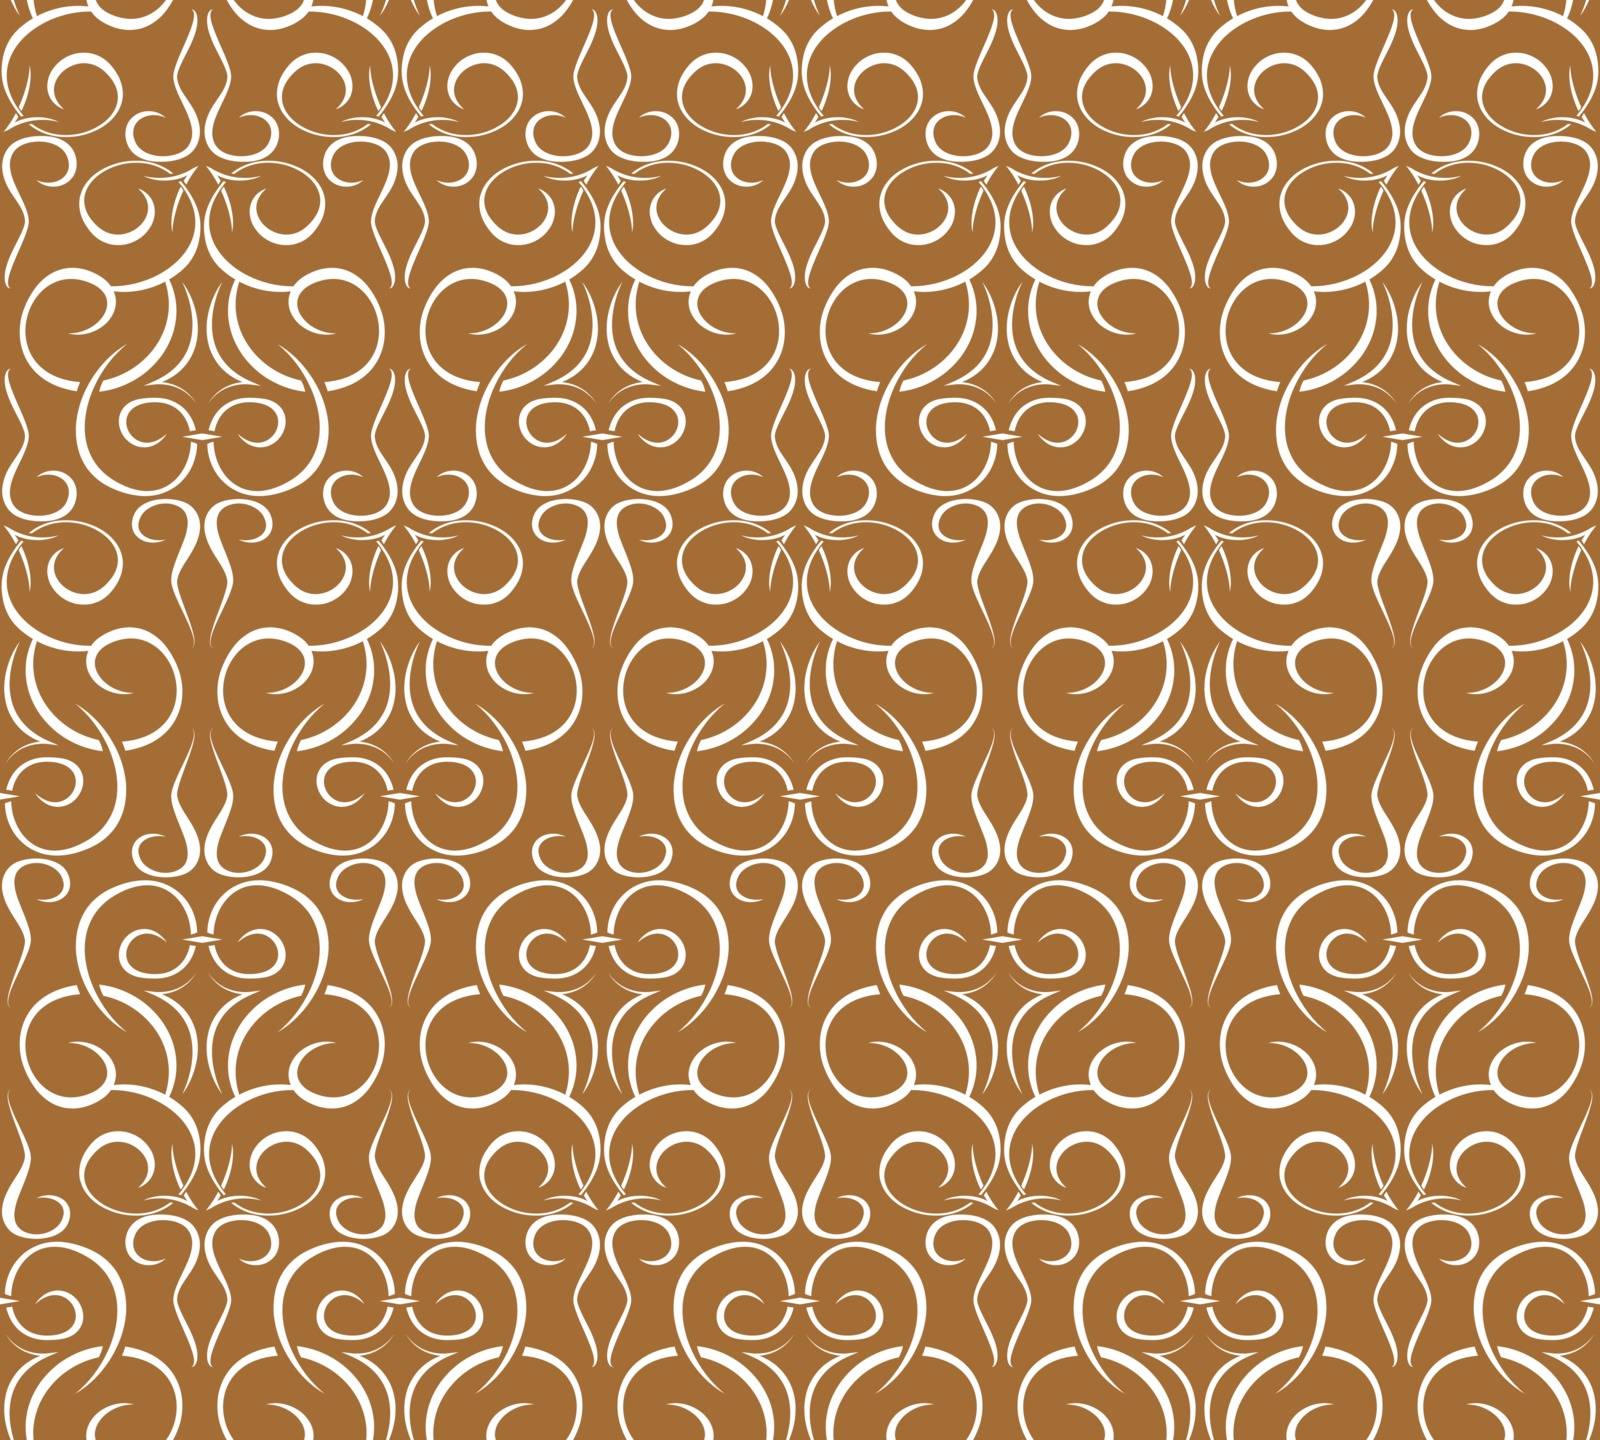 Repeating pattern on a brown background. seamless wallpaper